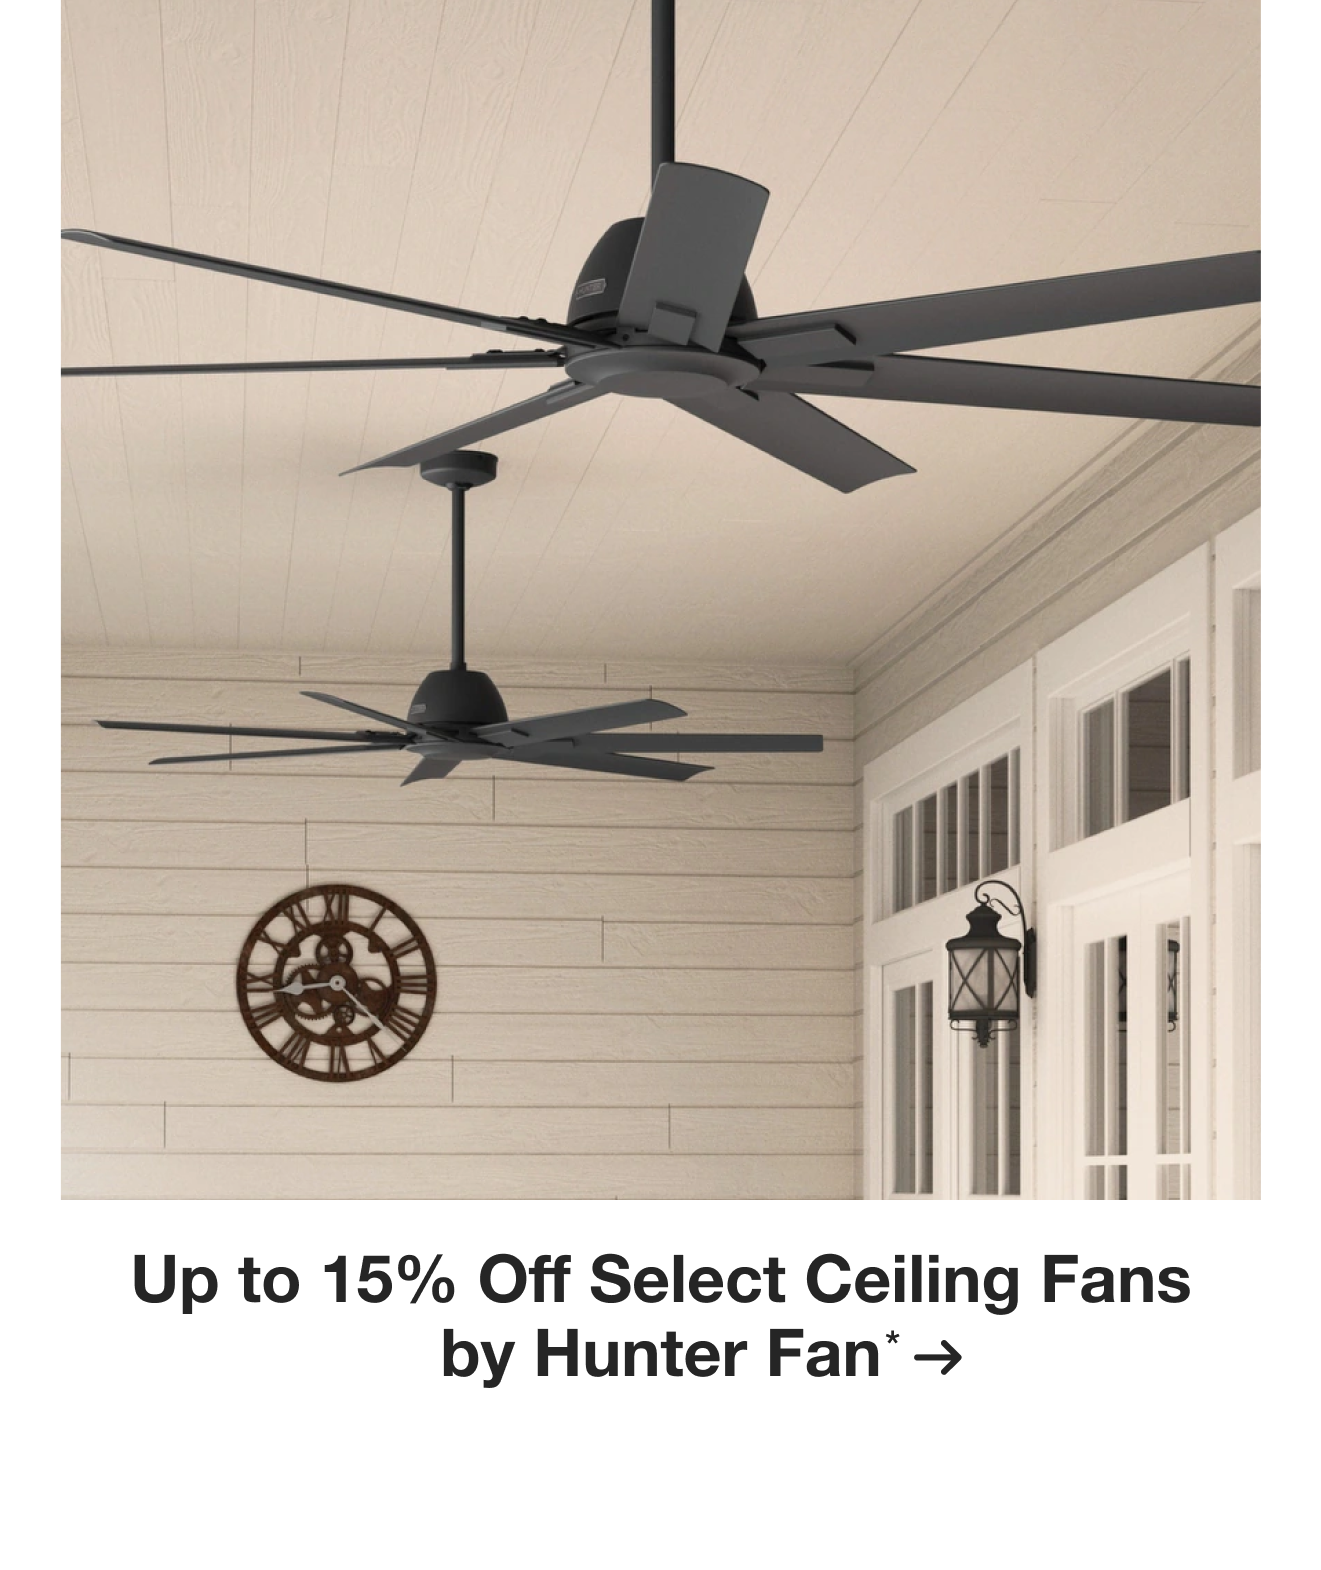 Up to 15% Off Select Ceiling Fans by Hunter Fan*